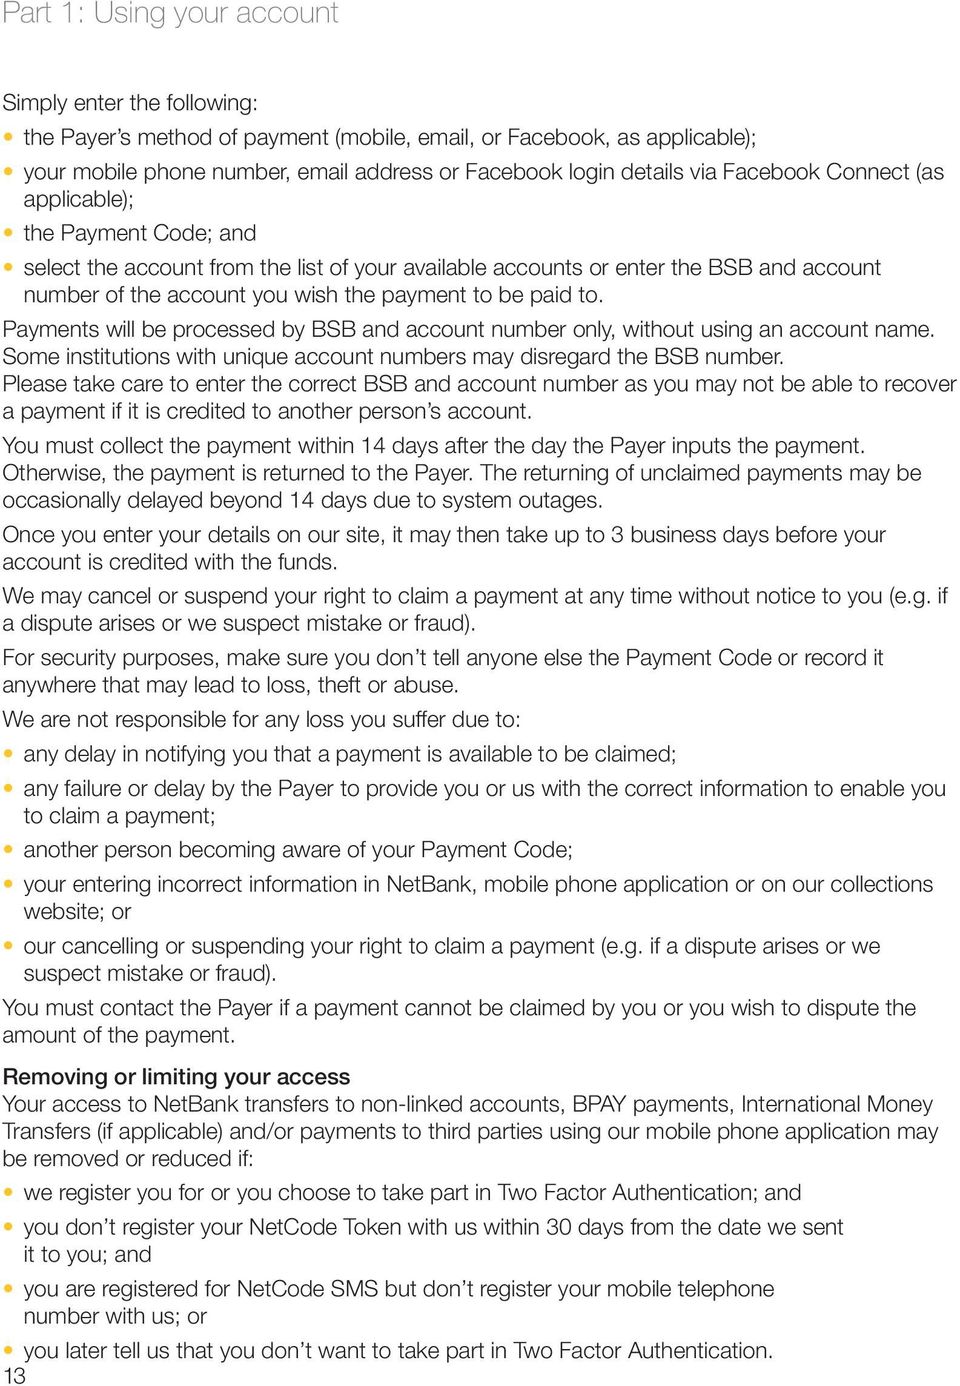 to. Payments will be processed by BSB and account number only, without using an account name. Some institutions with unique account numbers may disregard the BSB number.